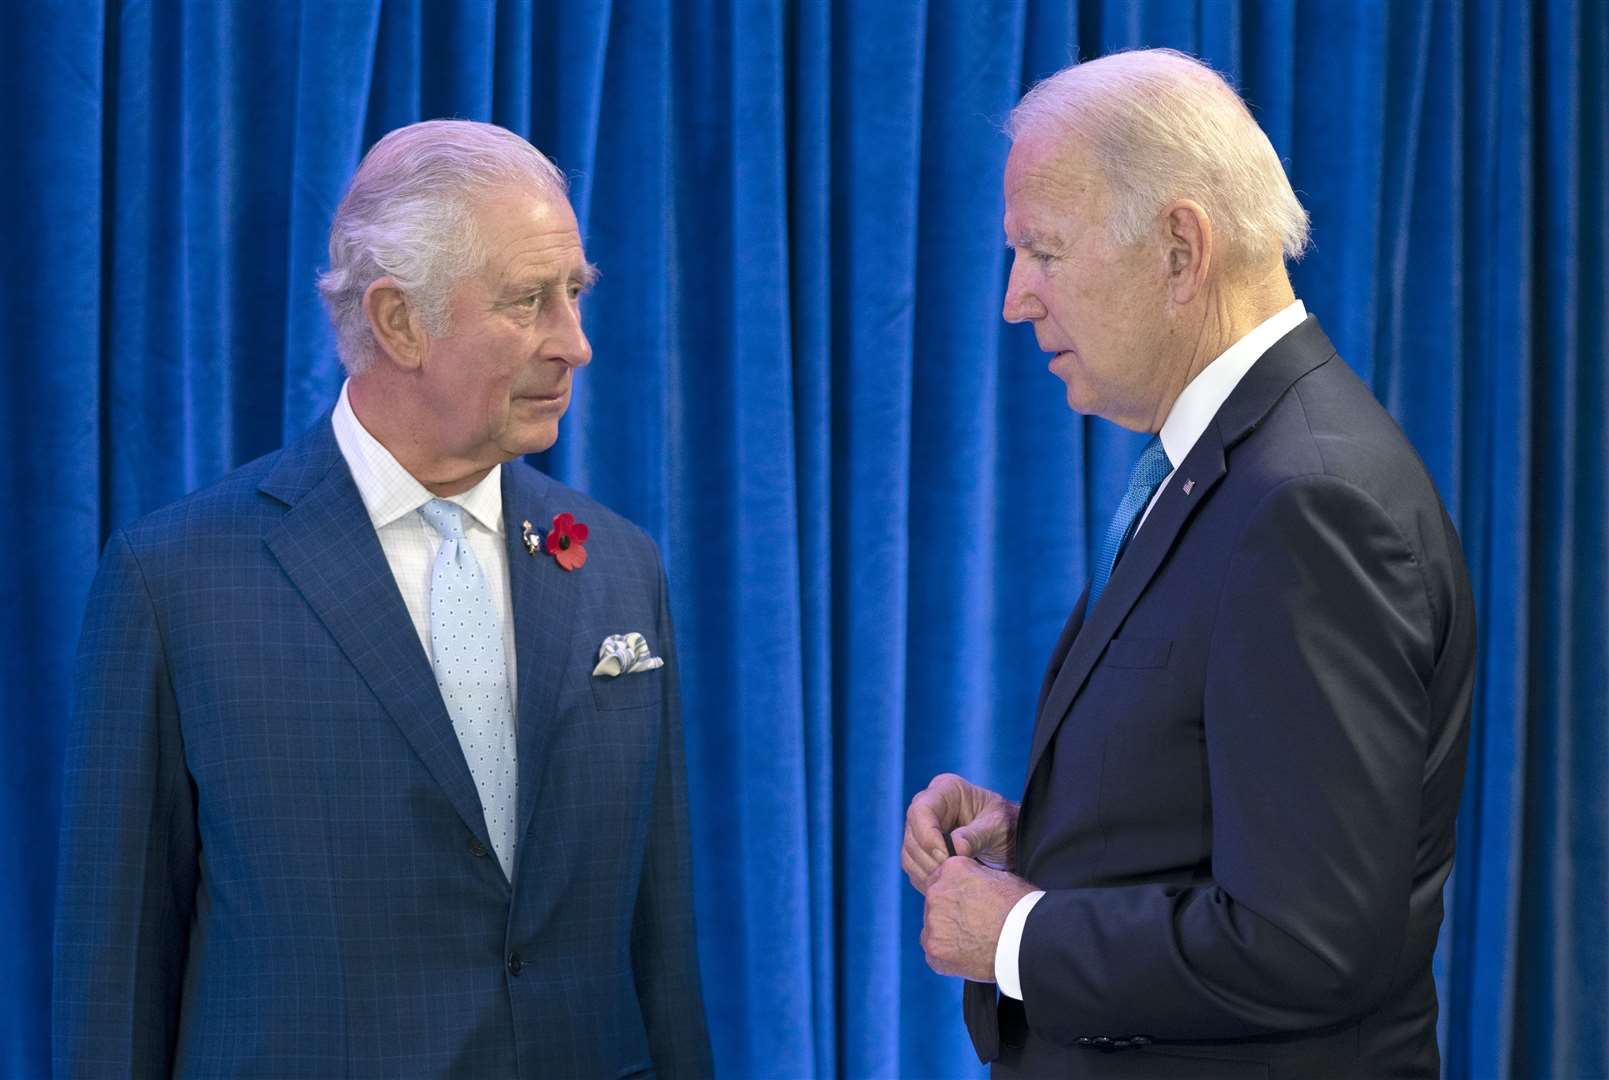 The then Prince of Wales – now King Charles III – with US President Joe Biden during the Cop26 summit in Glasgow last November (Jane Barlow/PA)